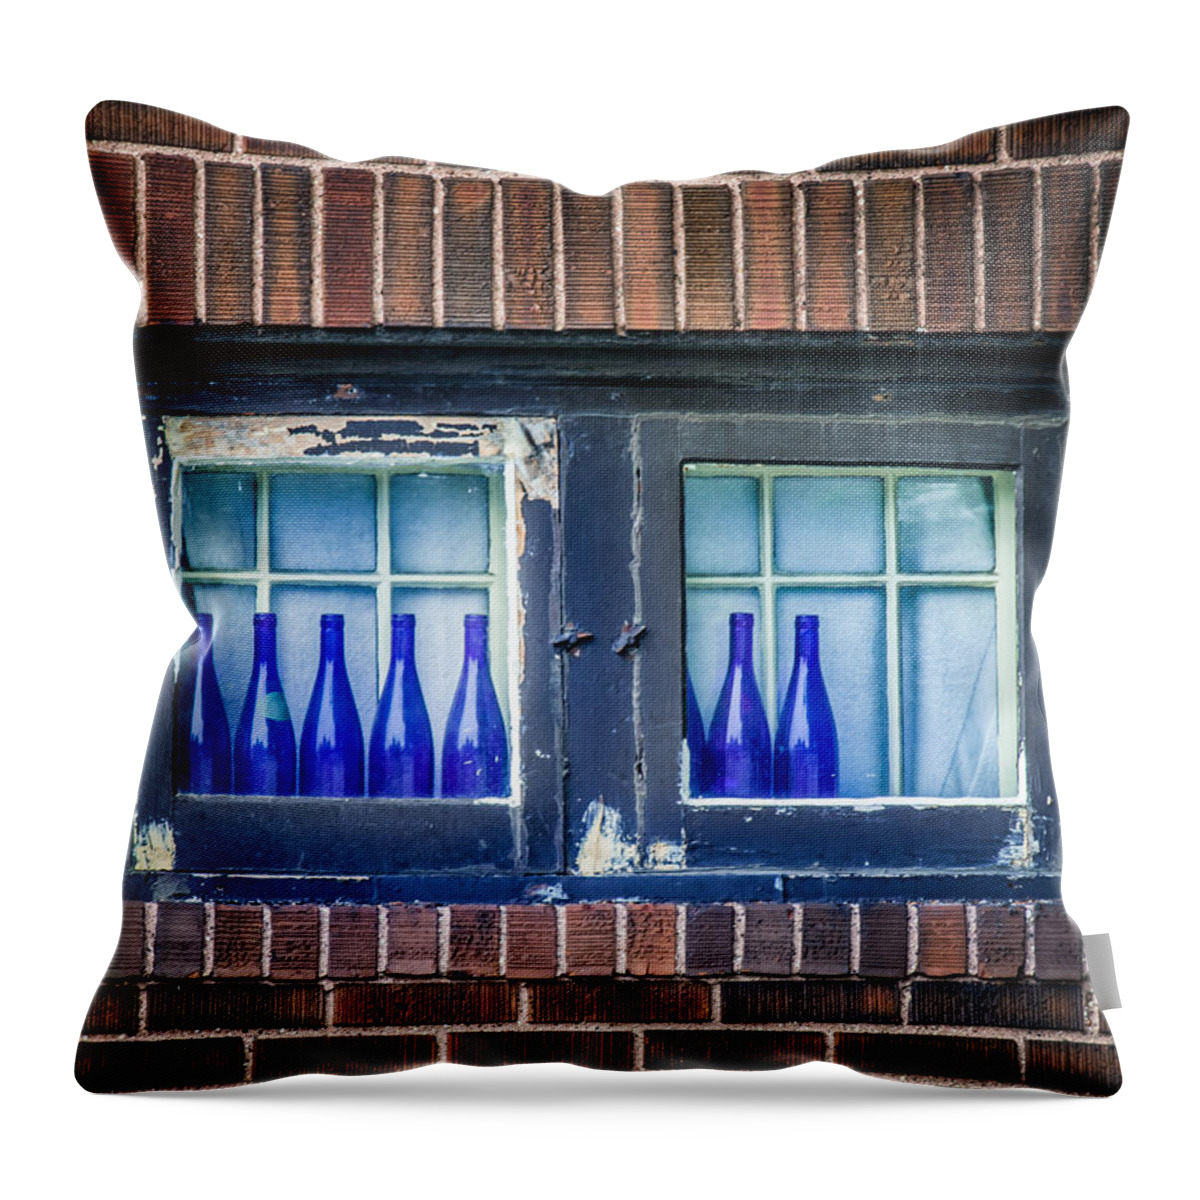 Bottles Throw Pillow featuring the photograph Blue Bottles In A Window by Paul Freidlund